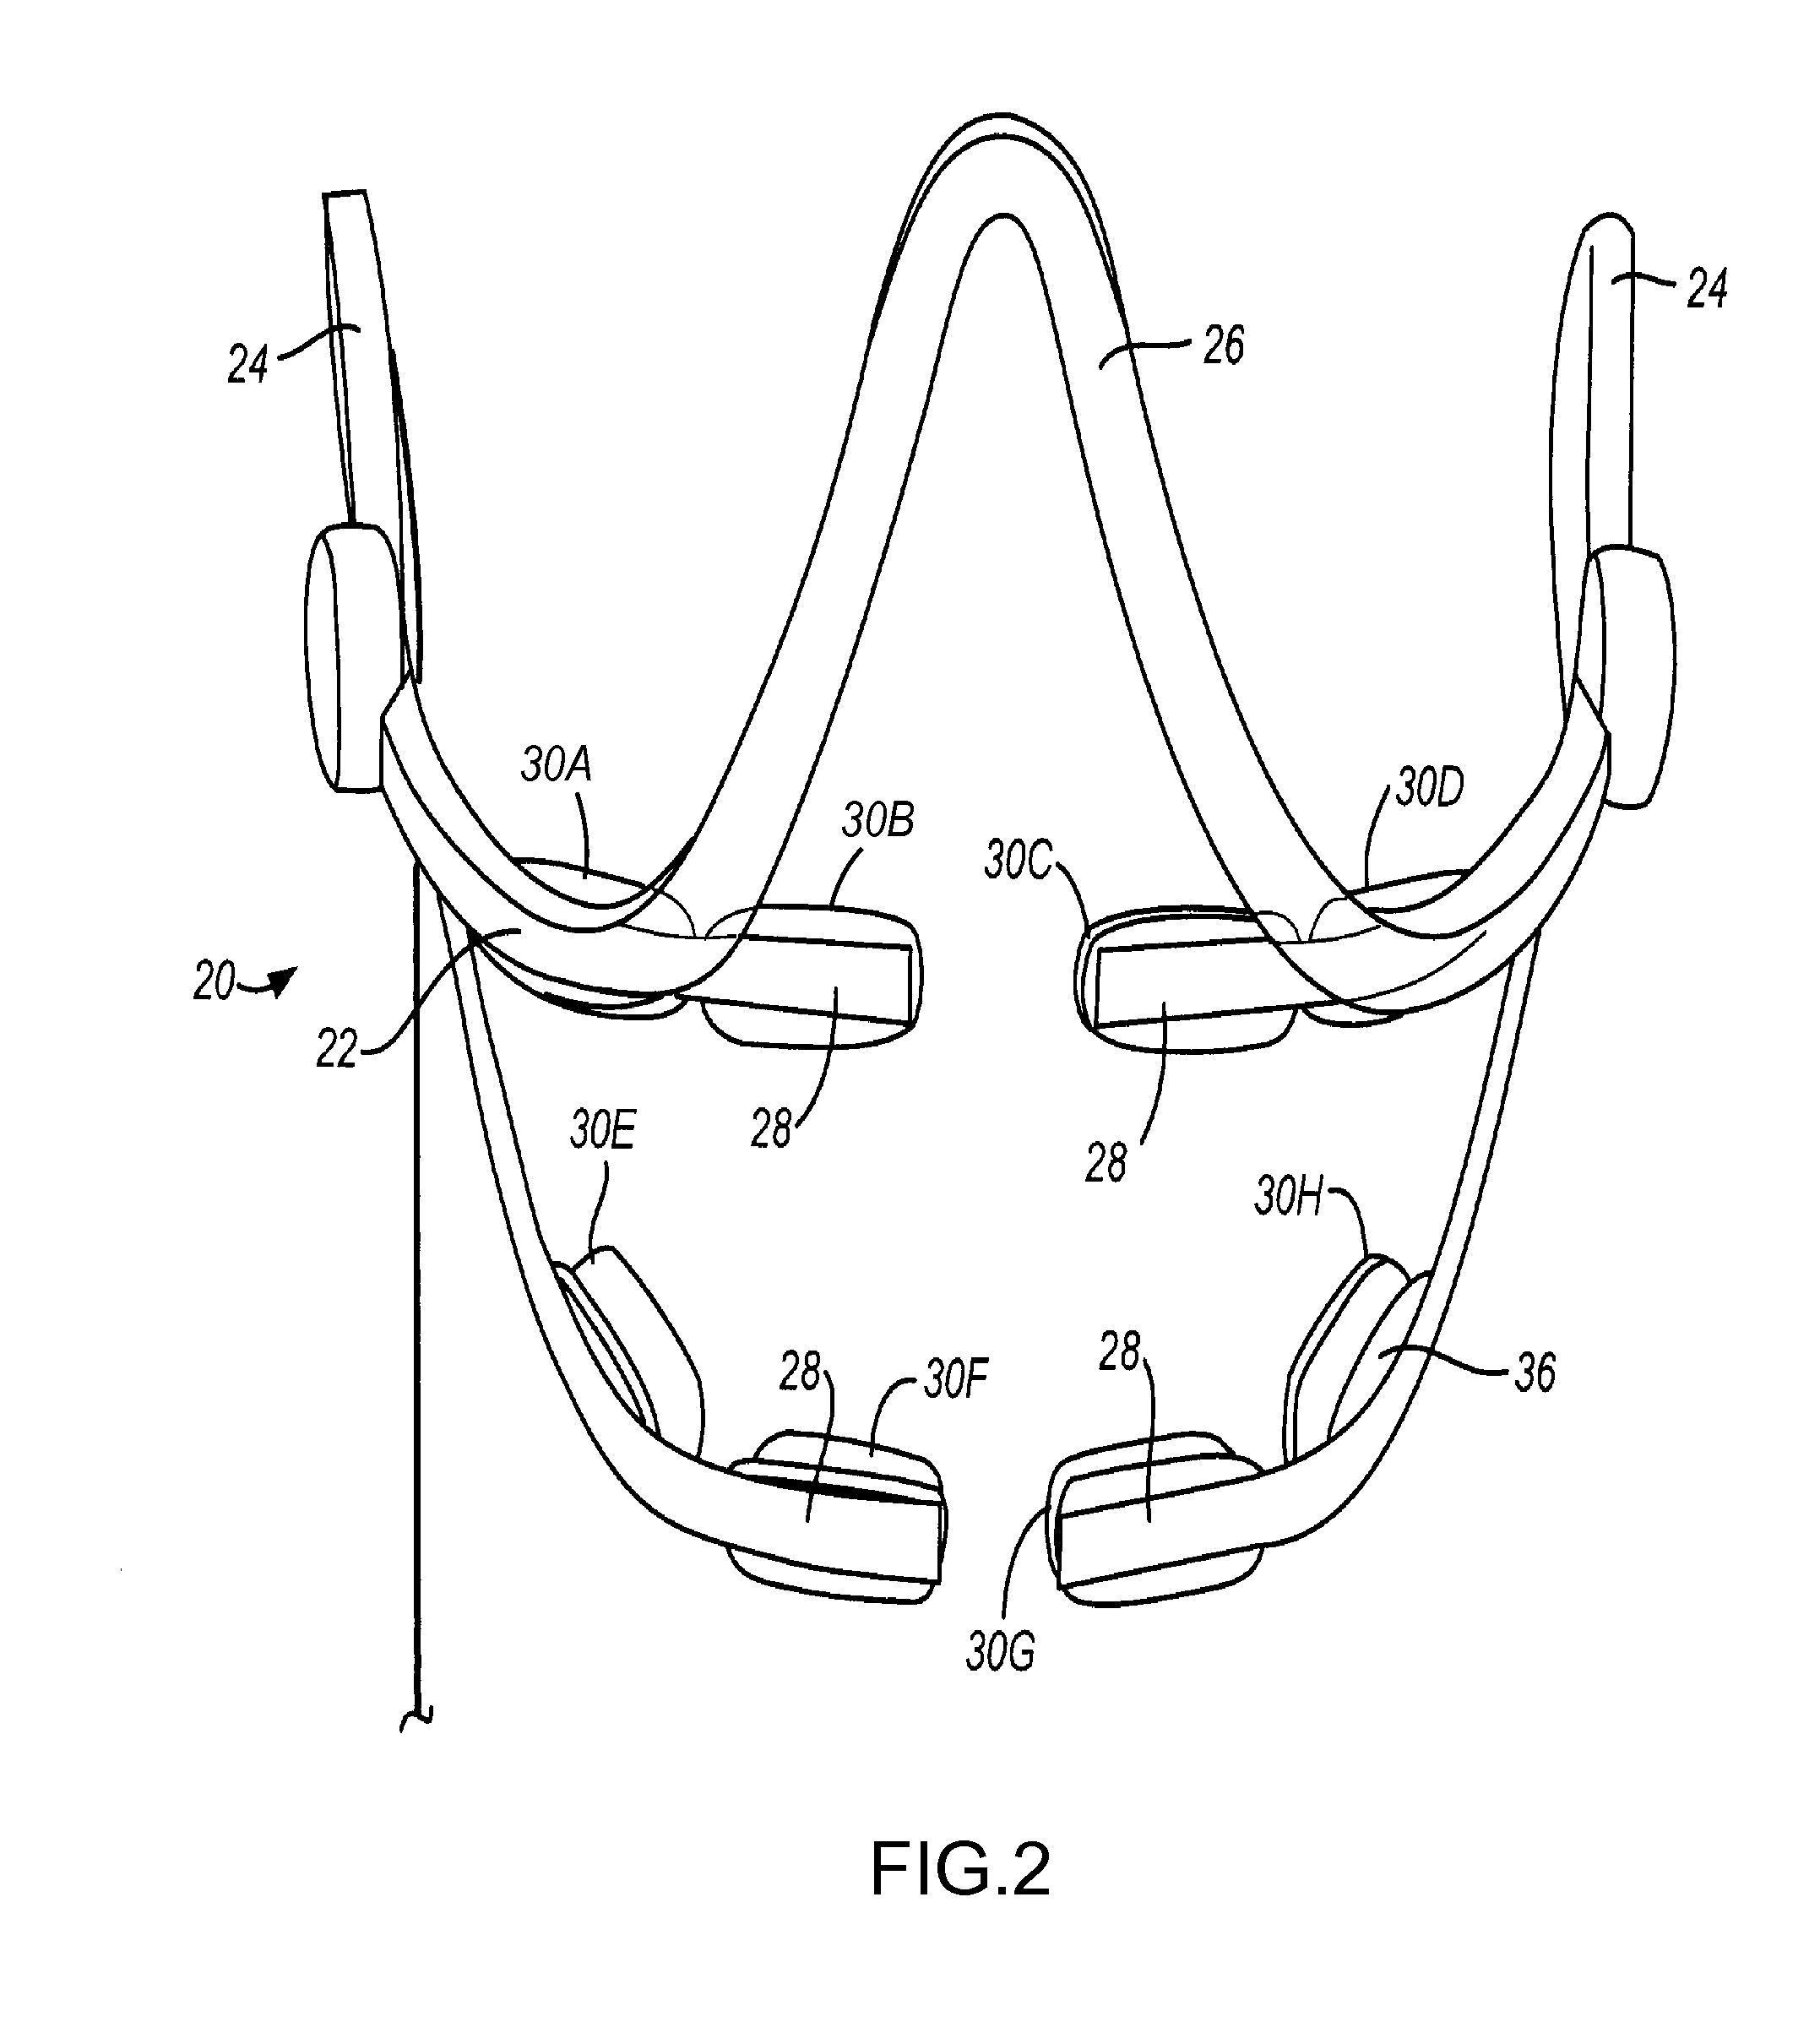 Methods useful for remodeling maxillofacial bone using light therapy and a functional appliance